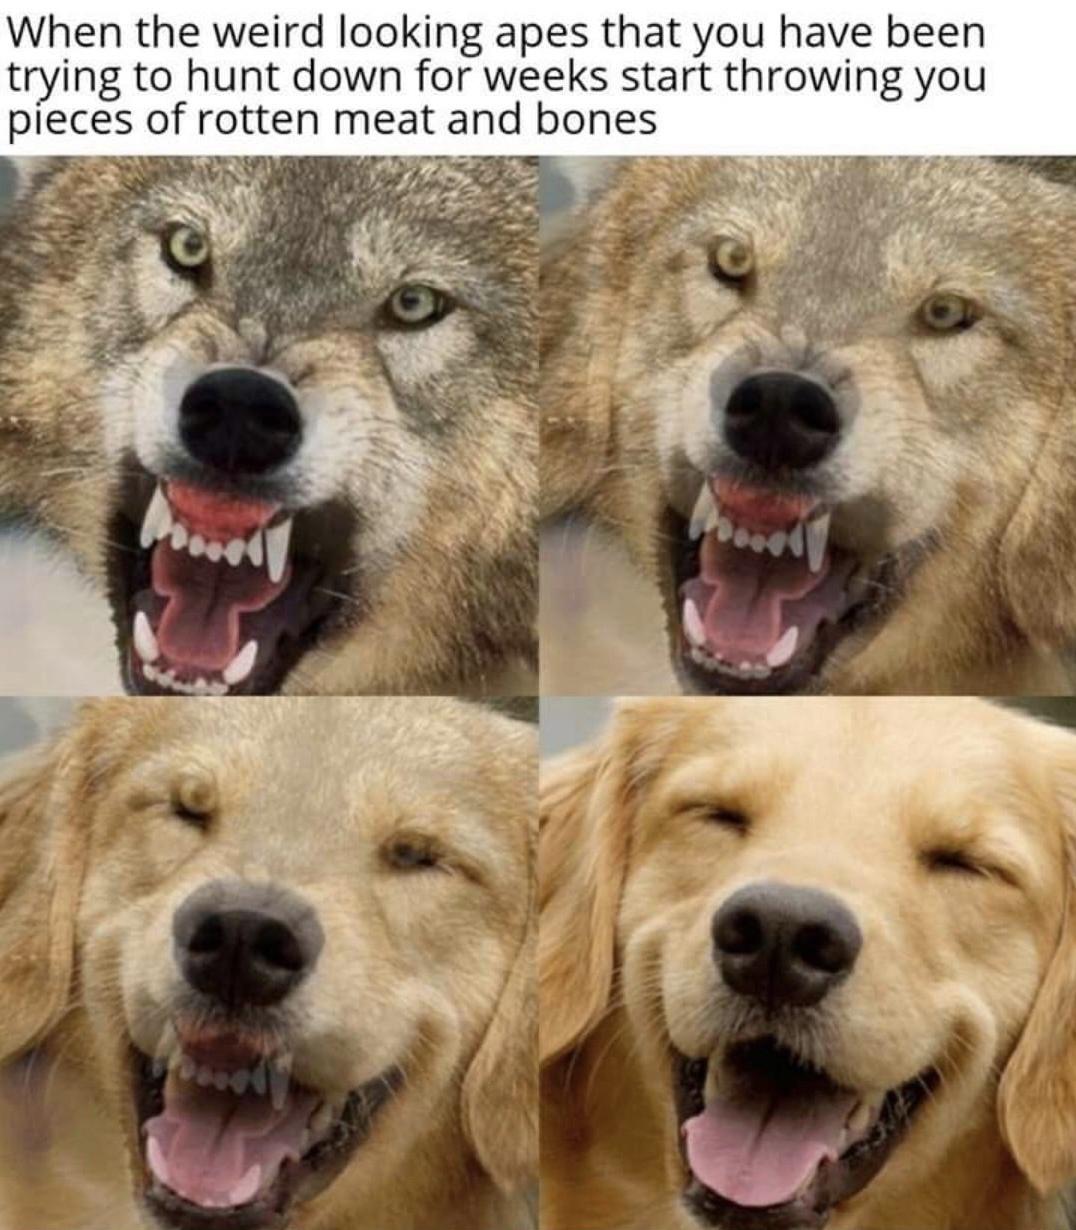 funny pics - wolf transforming into dog - When the weird looking apes that you have been trying to hunt down for weeks start throwing you pieces of rotten meat and bones